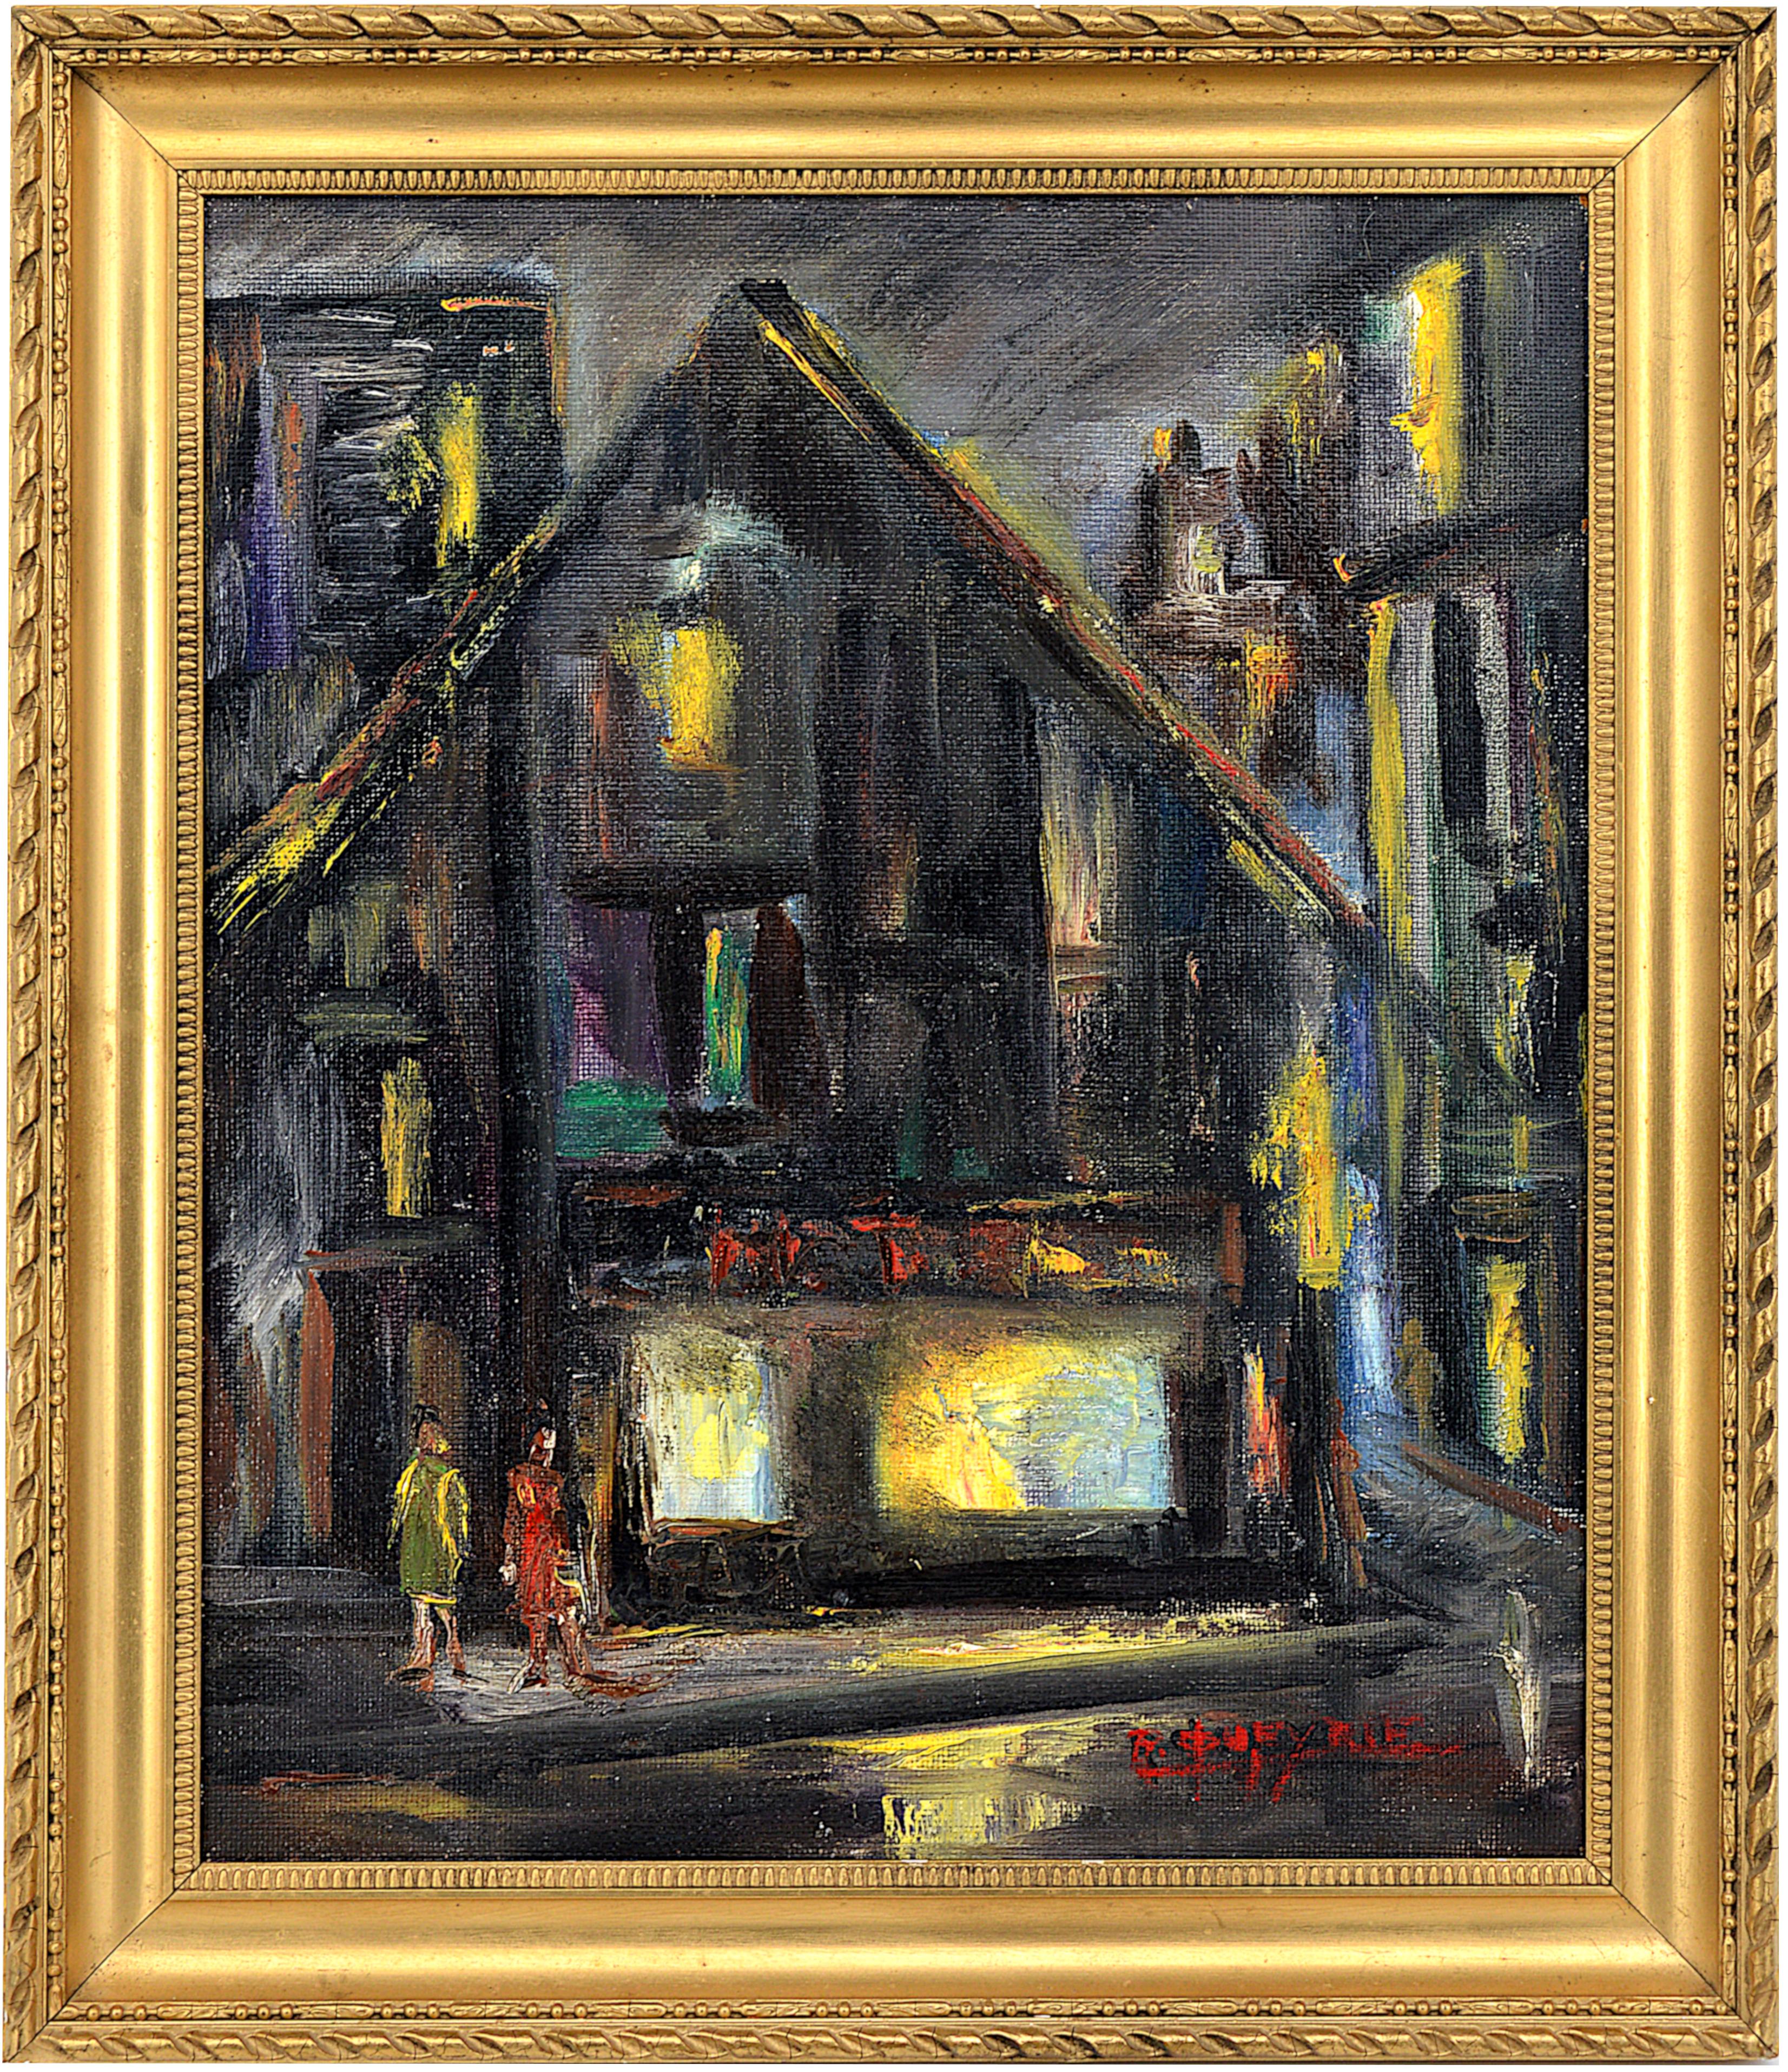 R. Queyrie Figurative Painting - R. QUEYRIE, Walking the Streets, Oil on Hardboard, 1950s